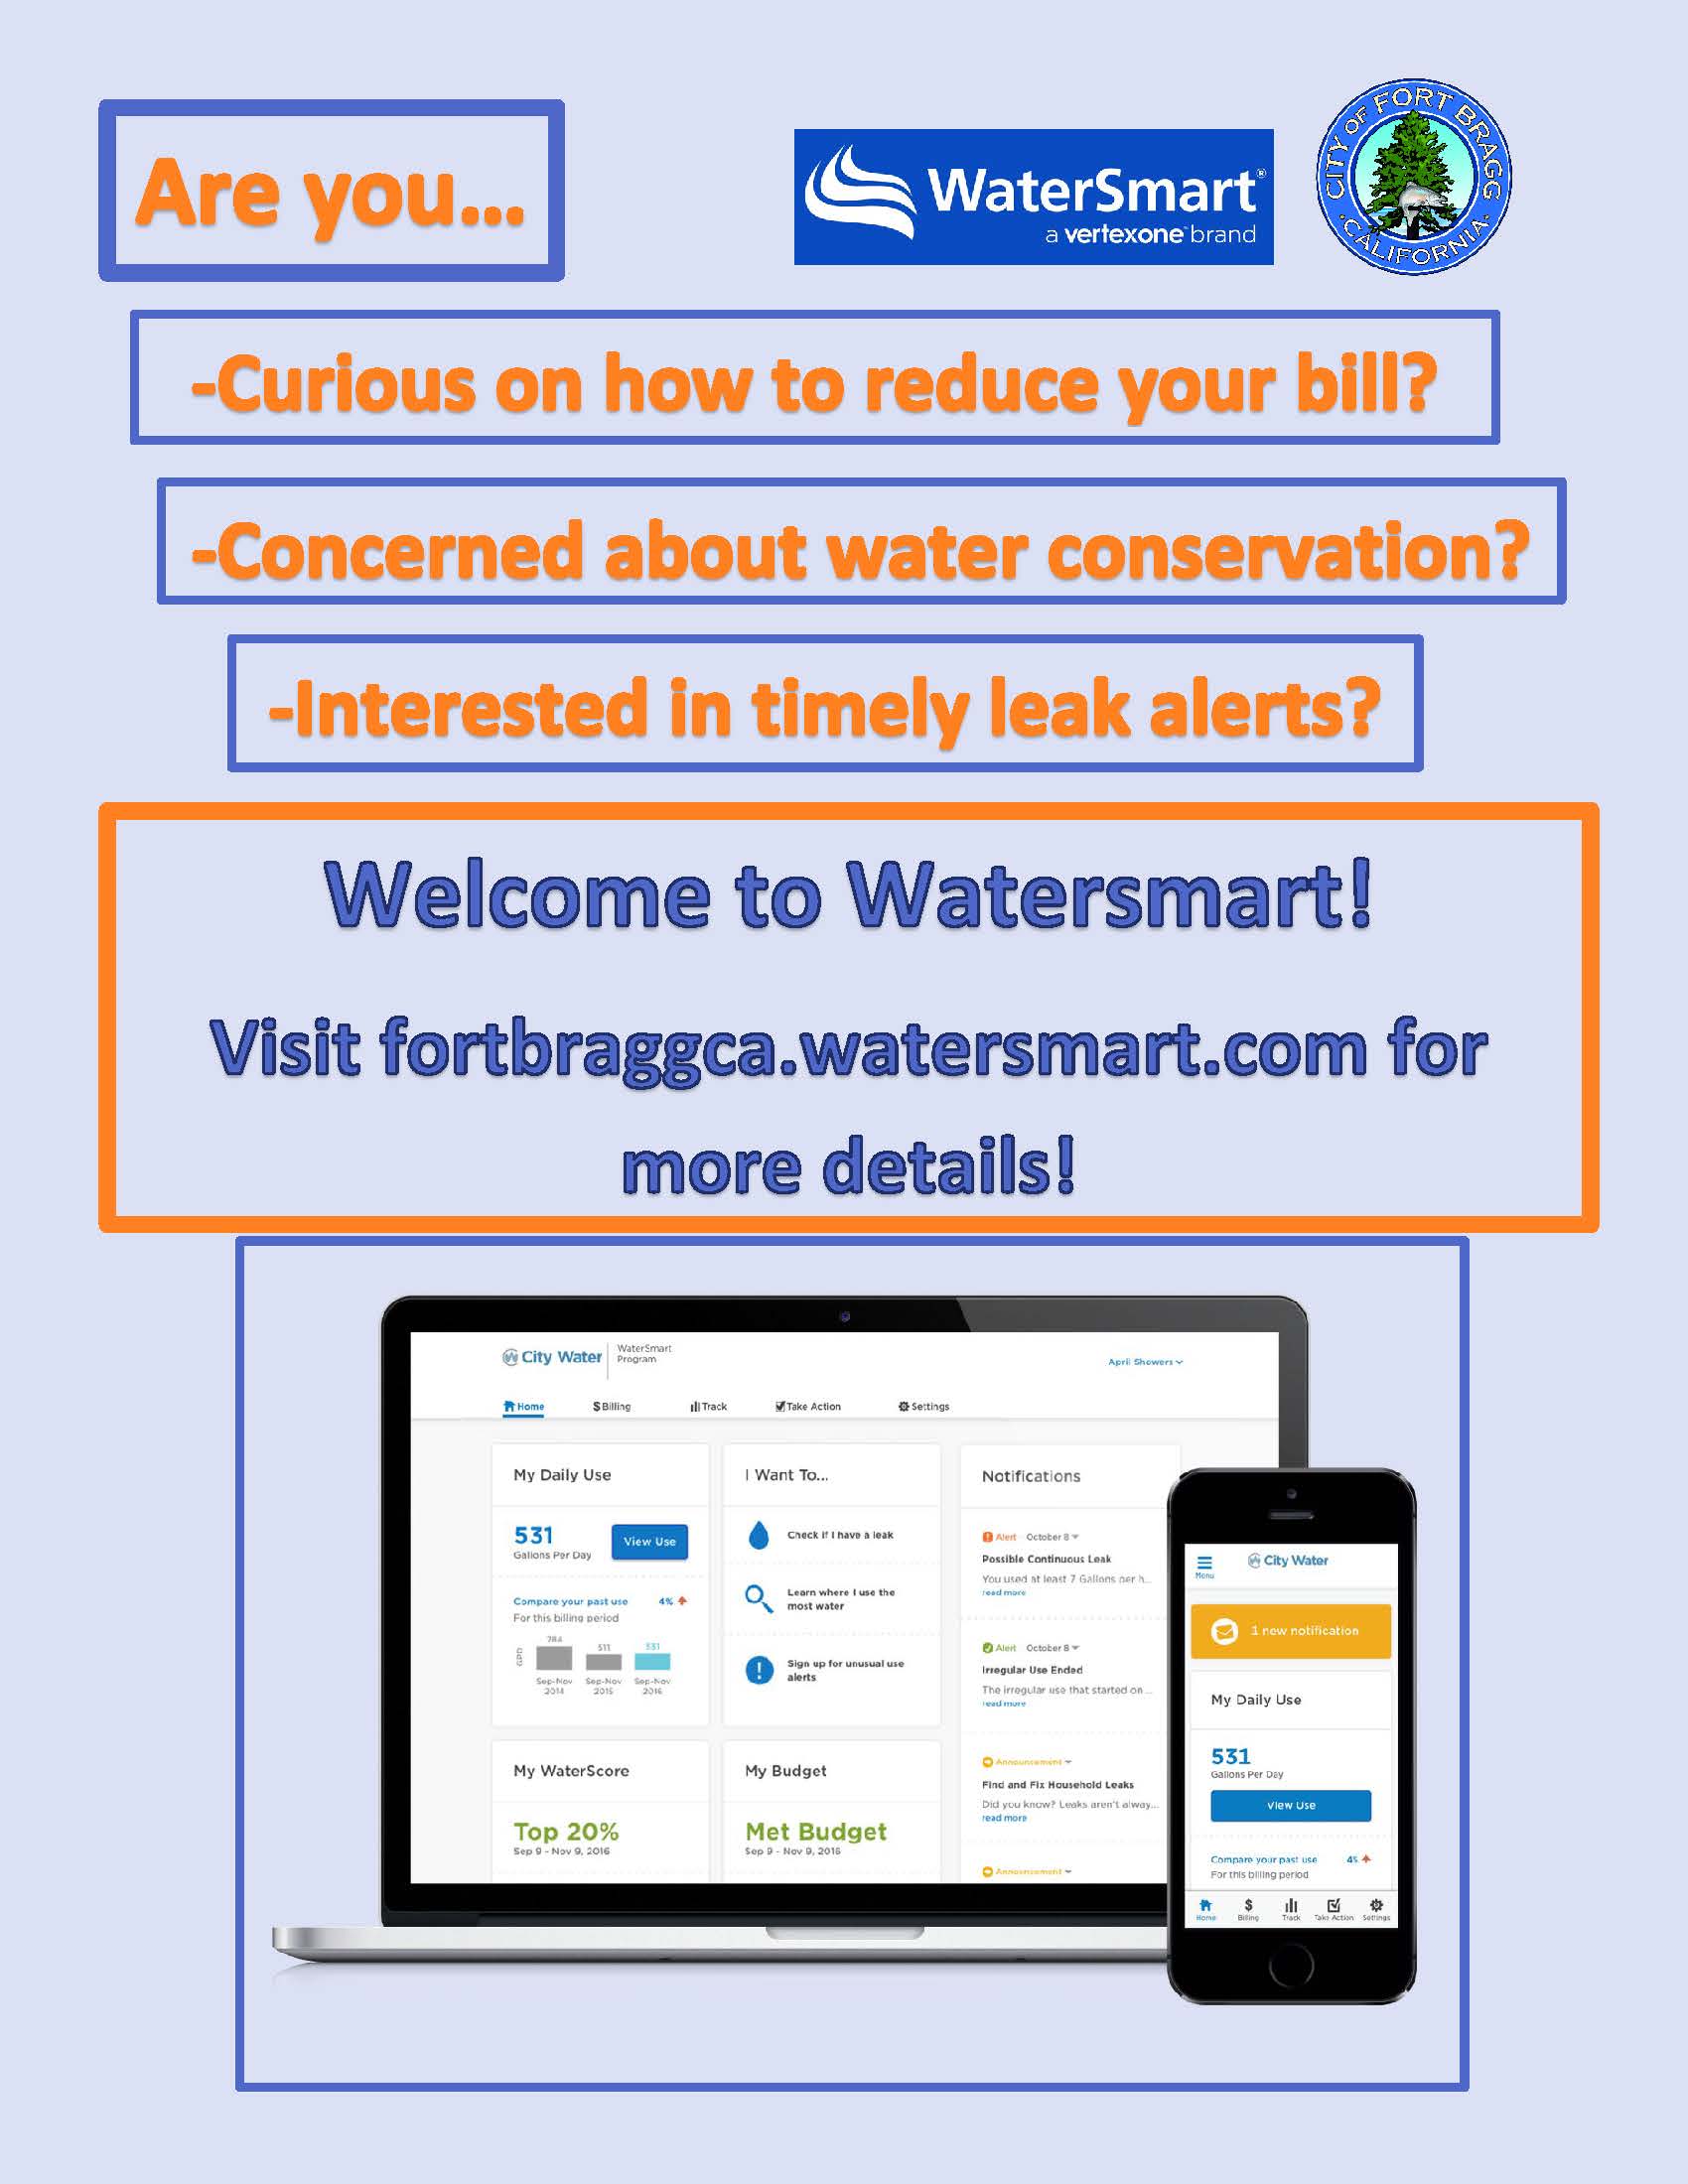 Welcome to Watersmart flyer - English